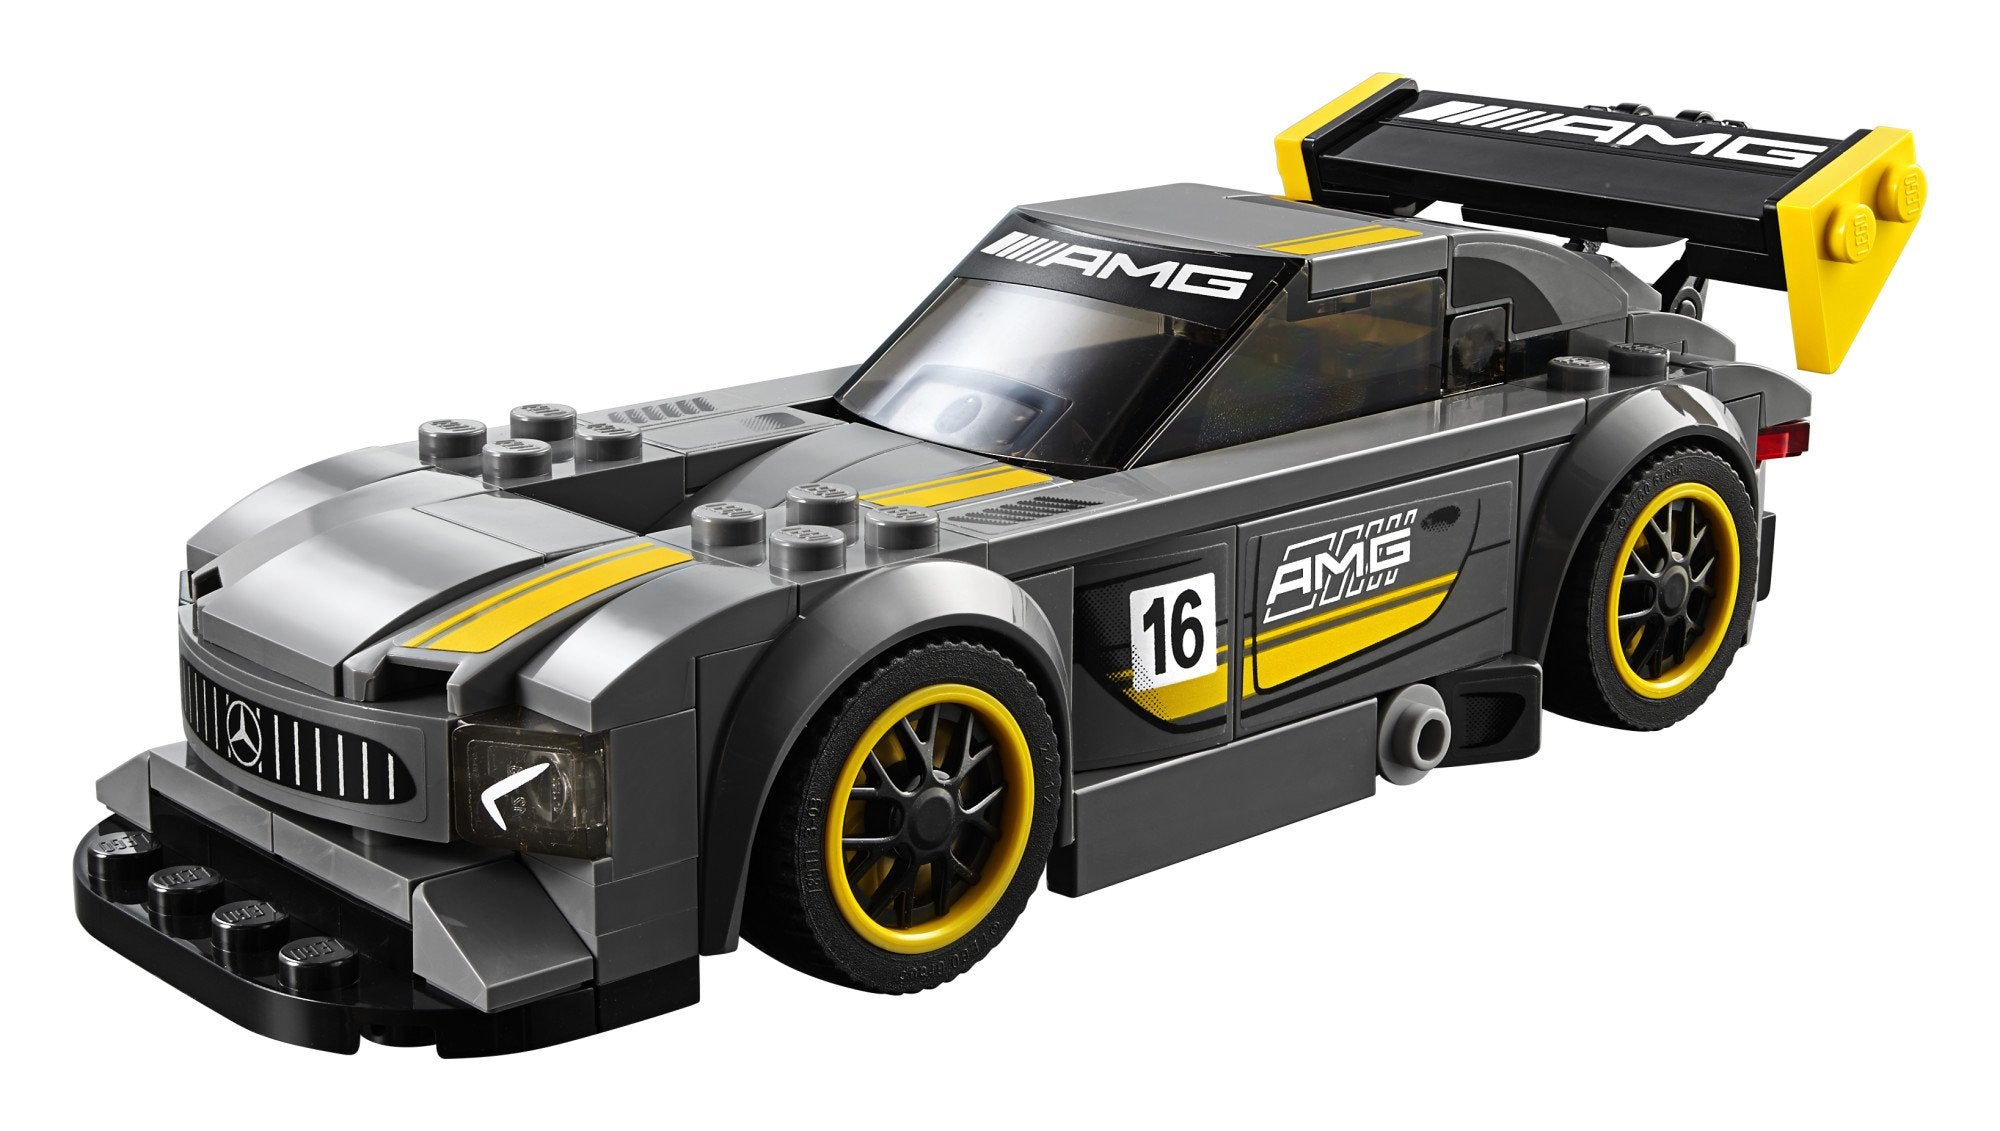 LEGO Speed Champions 6175226 Mercedes-Amg Gt3 75877